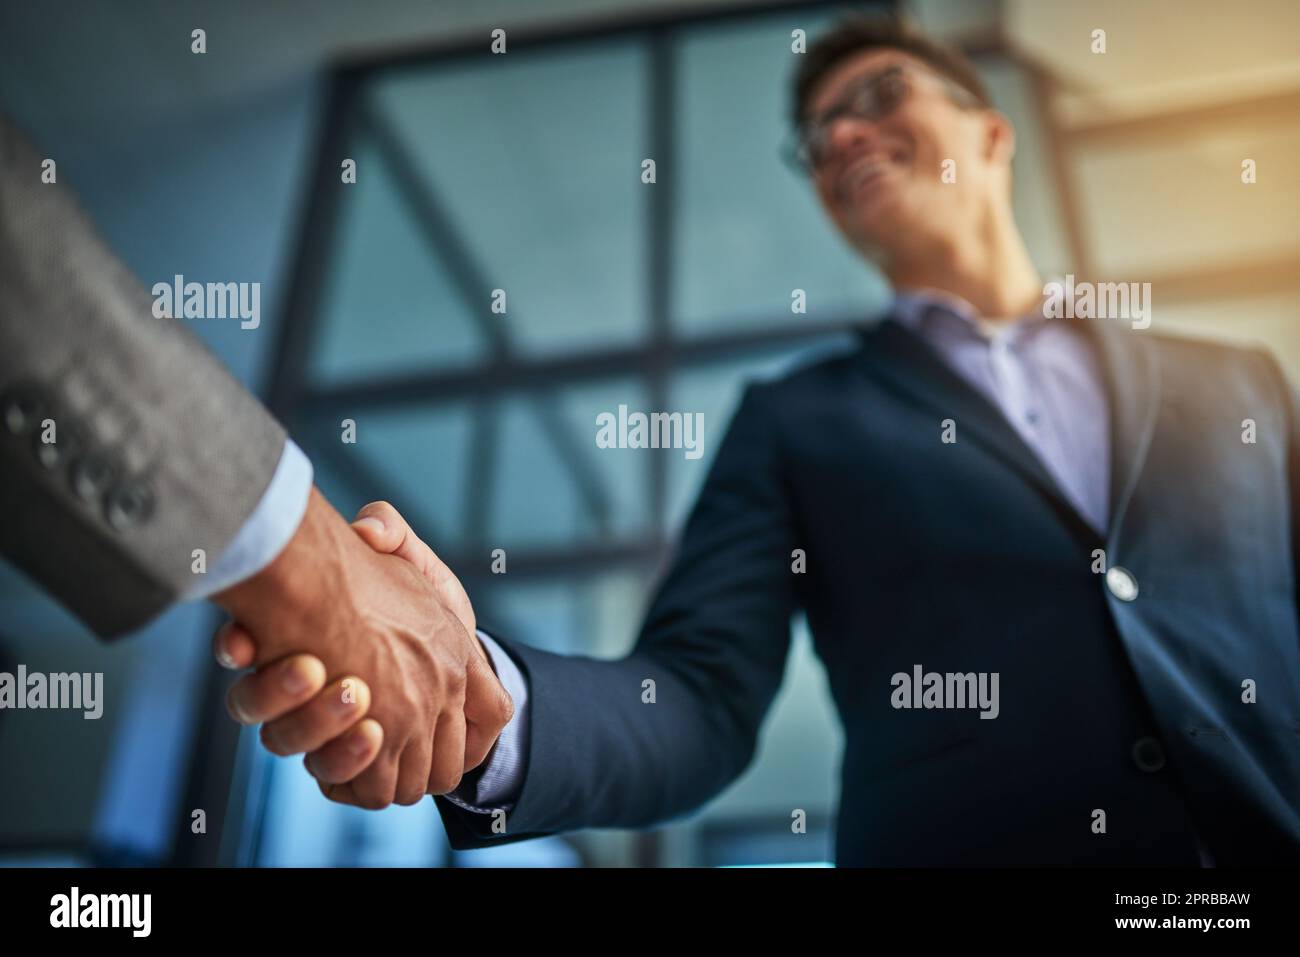 A professional handshake after a successful group collaboration meeting after in a modern corporate office. Young man shaking customers hands after sealing a business contract deal for the company Stock Photo